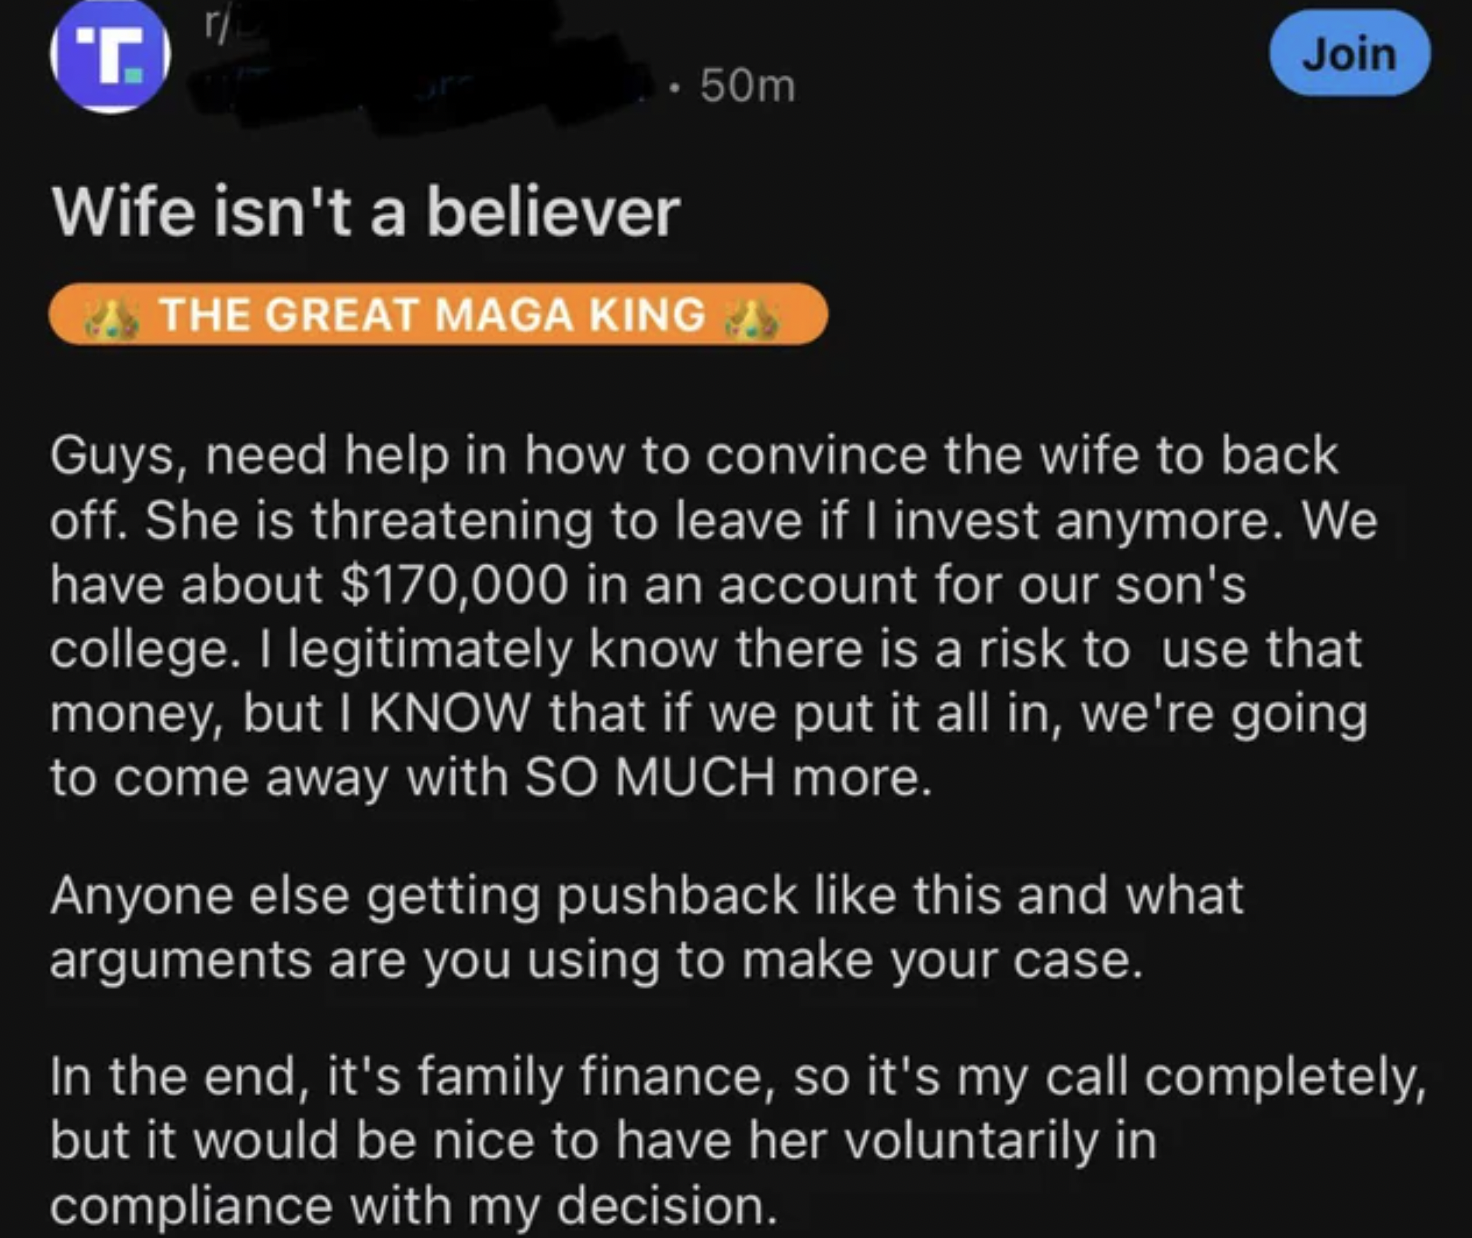 insane people on facebook - screenshot - T ri 50m Wife isn't a believer The Great Maga King Join Guys, need help in how to convince the wife to back off. She is threatening to leave if I invest anymore. We have about $170,000 in an account for our son's c